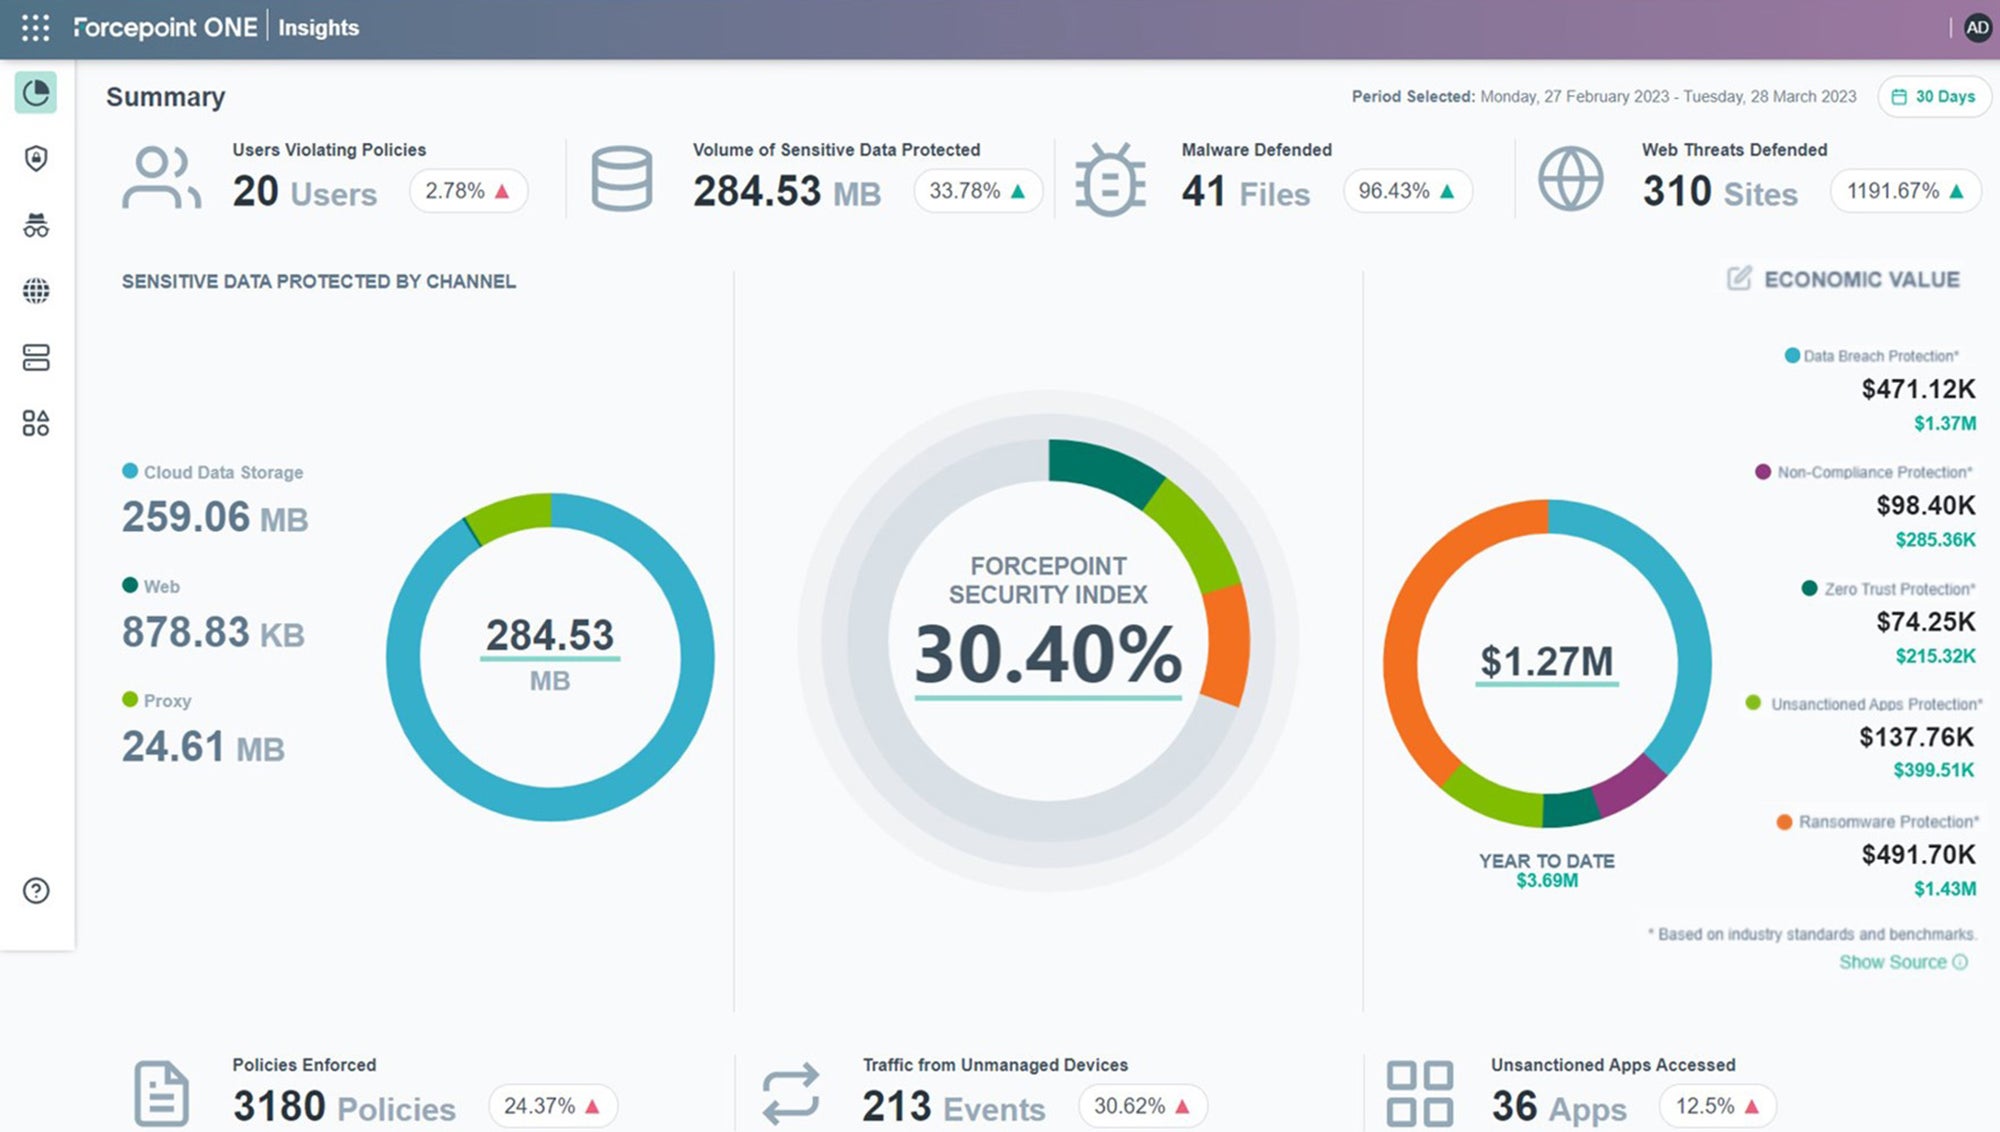 Forcepoint ONE Insights - Main Dashboard